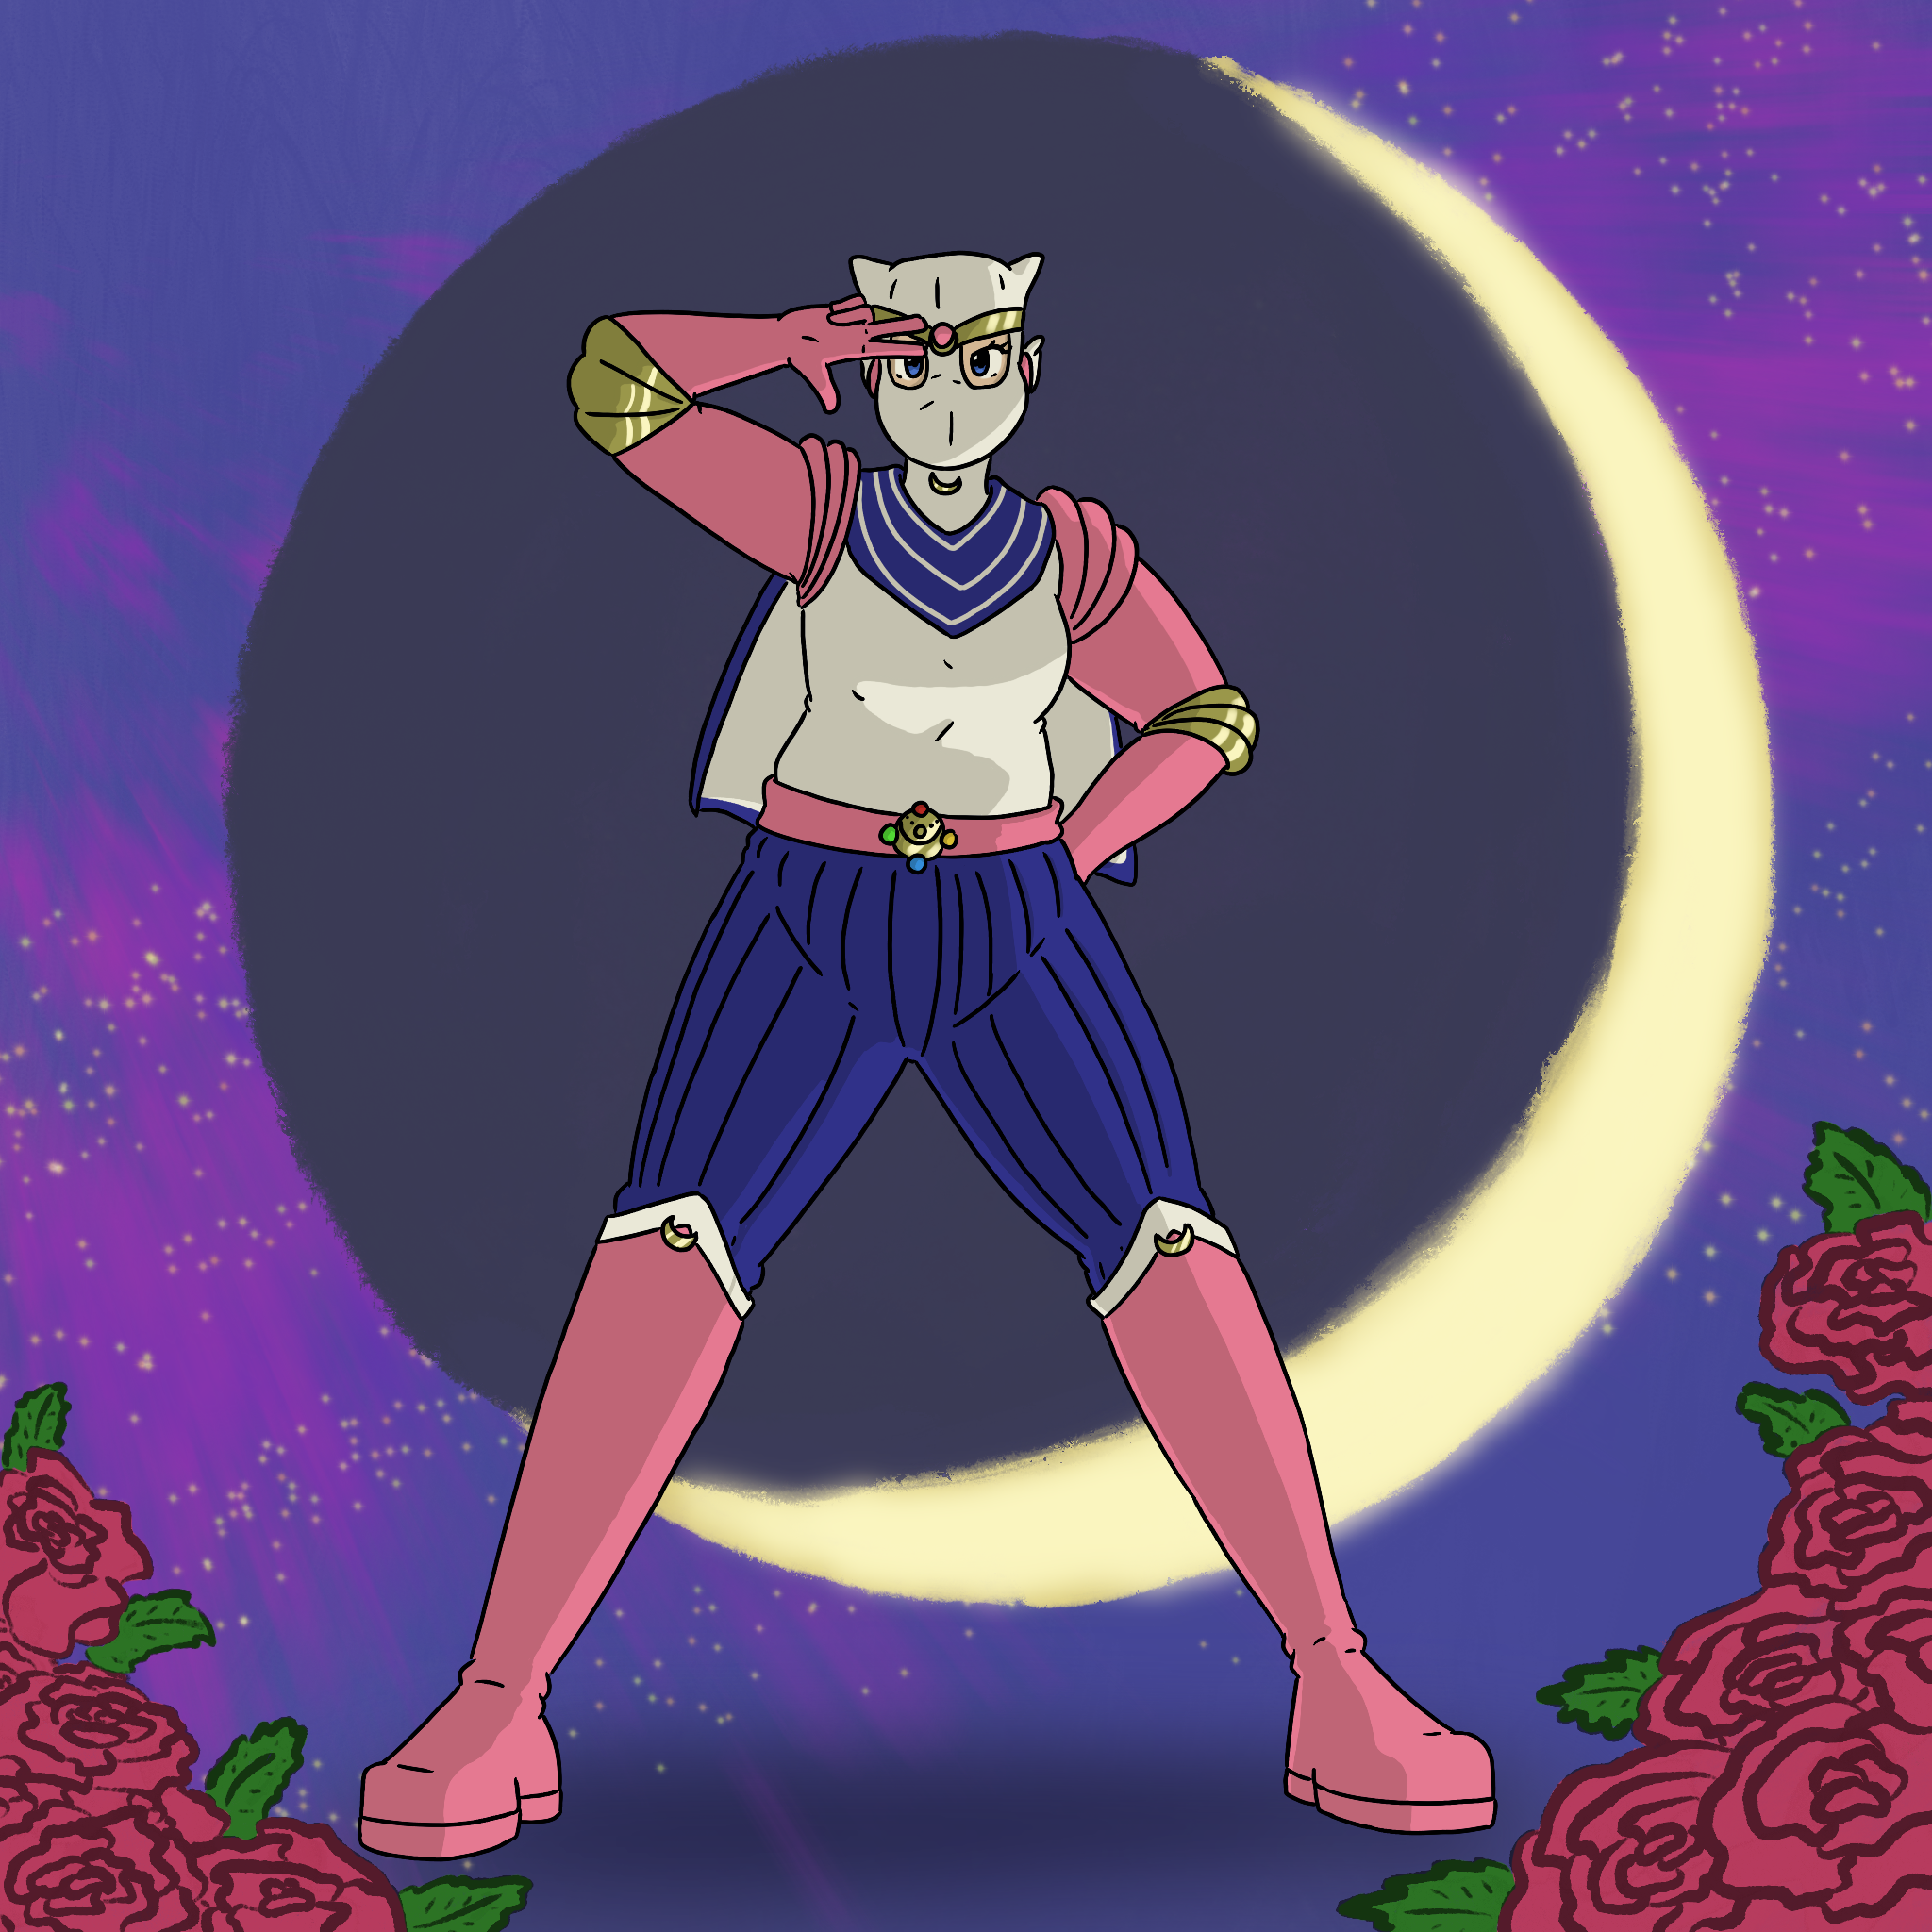 Usagi in costume as Citizen Moon, posing in front of a crescent moon